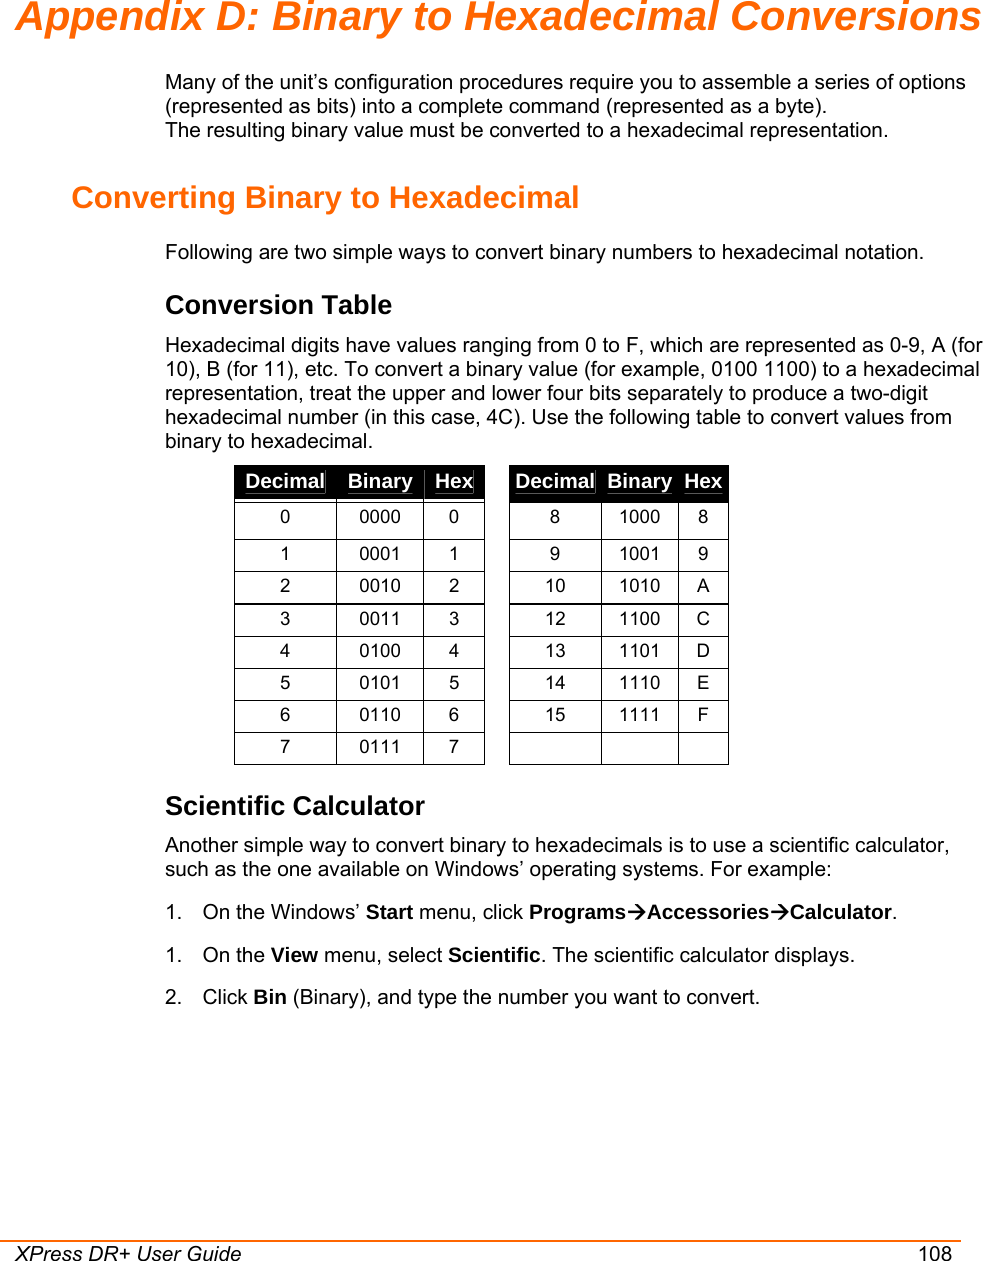  XPress DR+ User Guide 108 Appendix D: Binary to Hexadecimal Conversions Many of the unit’s configuration procedures require you to assemble a series of options (represented as bits) into a complete command (represented as a byte).  The resulting binary value must be converted to a hexadecimal representation. Converting Binary to Hexadecimal Following are two simple ways to convert binary numbers to hexadecimal notation. Conversion Table Hexadecimal digits have values ranging from 0 to F, which are represented as 0-9, A (for 10), B (for 11), etc. To convert a binary value (for example, 0100 1100) to a hexadecimal representation, treat the upper and lower four bits separately to produce a two-digit hexadecimal number (in this case, 4C). Use the following table to convert values from binary to hexadecimal. Decimal  Binary Hex   Decimal Binary Hex0 0000 0  8 1000 8 1 0001 1  9 1001 9 2  0010 2  10  1010 A 3  0011 3  12  1100 C 4  0100 4  13  1101 D 5  0101 5  14  1110 E 6  0110 6  15  1111 F 7 0111 7      Scientific Calculator Another simple way to convert binary to hexadecimals is to use a scientific calculator, such as the one available on Windows’ operating systems. For example: 1.  On the Windows’ Start menu, click ProgramsÆAccessoriesÆCalculator. 1. On the View menu, select Scientific. The scientific calculator displays. 2. Click Bin (Binary), and type the number you want to convert.  